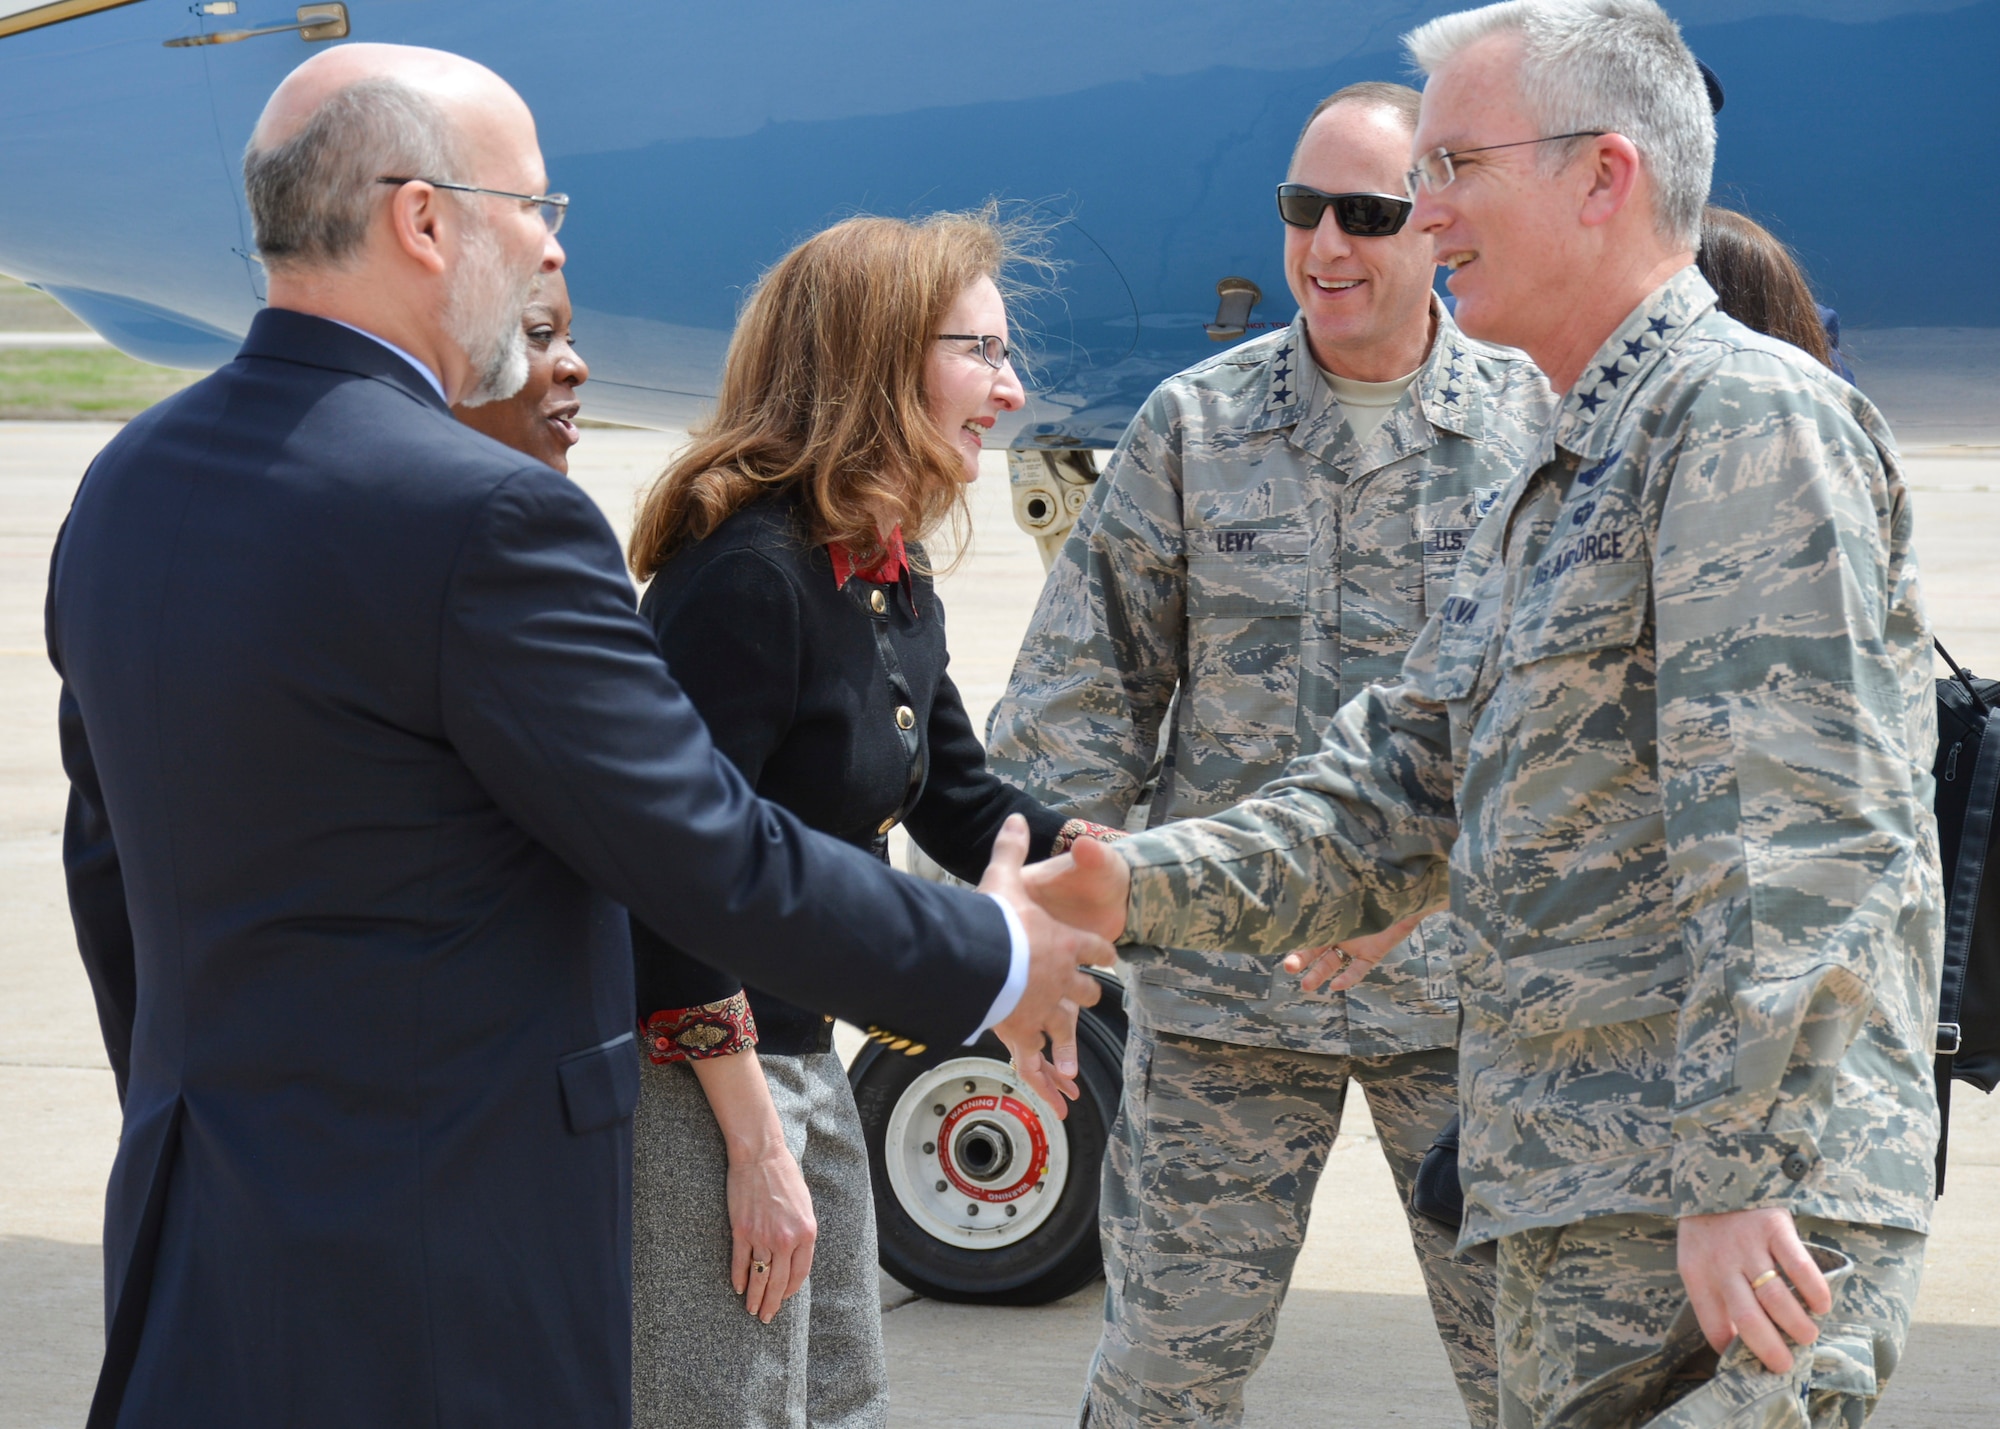 Gen. Paul J. Selva, Vice Chairman
of the Joint Chiefs of Staff, and his wife, Mrs. Ricki Selva, are welcomed
to Tinker Air Force Base today by Lt. Gen. Lee K. Levy II, Air Force
Sustainment Center commander, his wife Mrs. Rhonda Levy, center, Col.
Stephanie Wilson, 72 Air Base Wing commander, and her husband Scott. General
Selva and his wife are here to learn about the AFSC and Tinker’s
contribution to the nation's strategic nuclear deterrence and attend the
Tinker Community Dining Out, where the Vice Chairman will serve as the
featured speaker. (U.S. Air Force photo by Darren D. Heusel)
